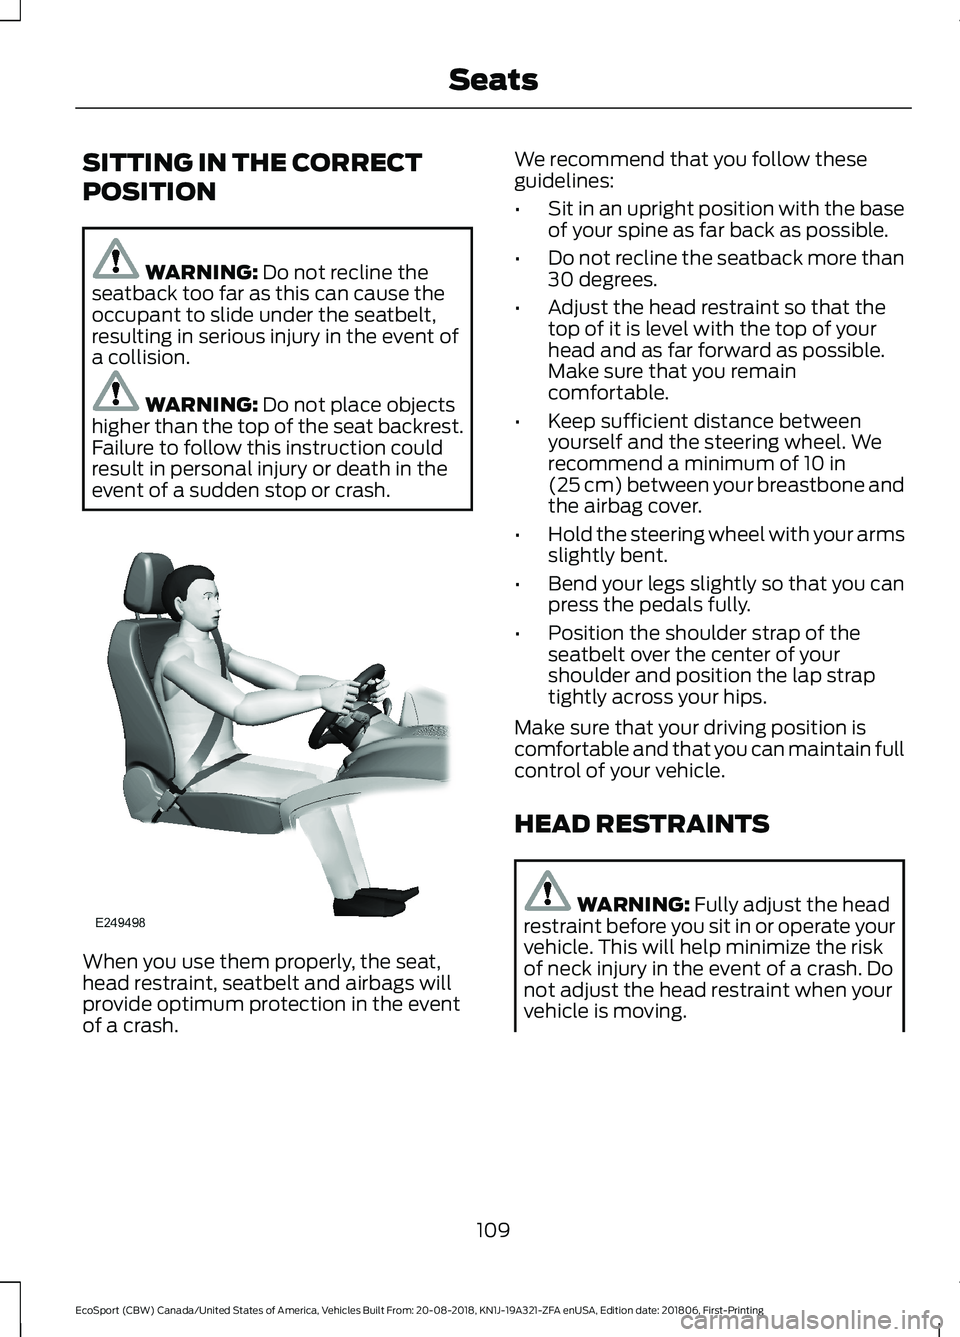 FORD ECOSPORT 2019 Owners Manual SITTING IN THE CORRECT
POSITION
WARNING: Do not recline theseatback too far as this can cause theoccupant to slide under the seatbelt,resulting in serious injury in the event ofa collision.
WARNING: D